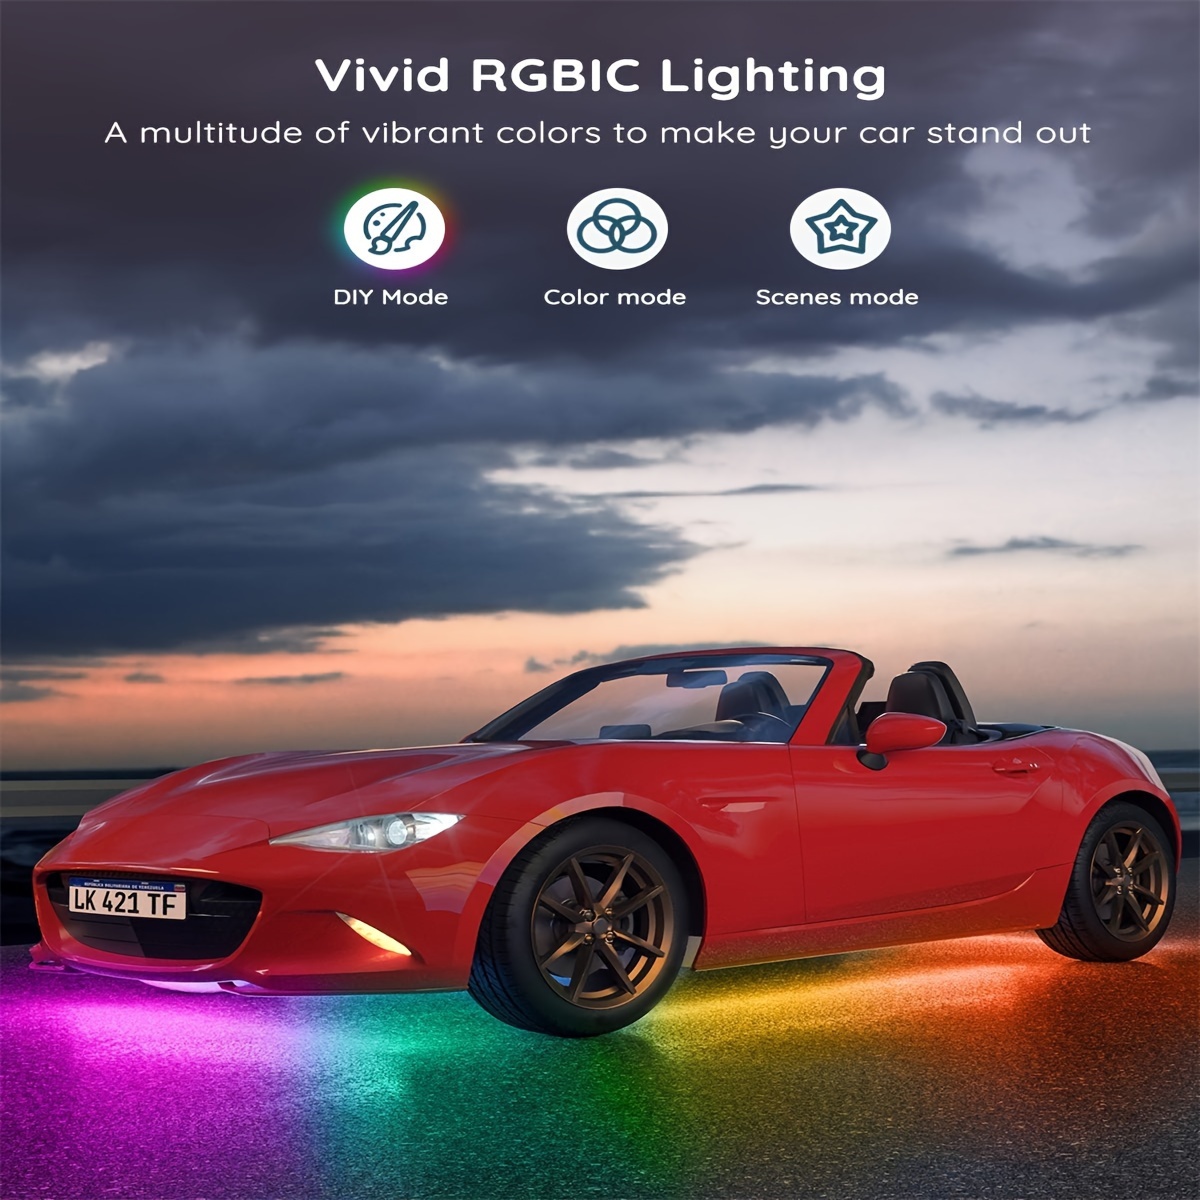 Car Underglow Lights,4pcs Led Strip Lights With Dream Color Chasing, RGBIC  APP Control Underbody Waterproof Light Kit For Cars,SUVs,Trucks, DC 12-24V